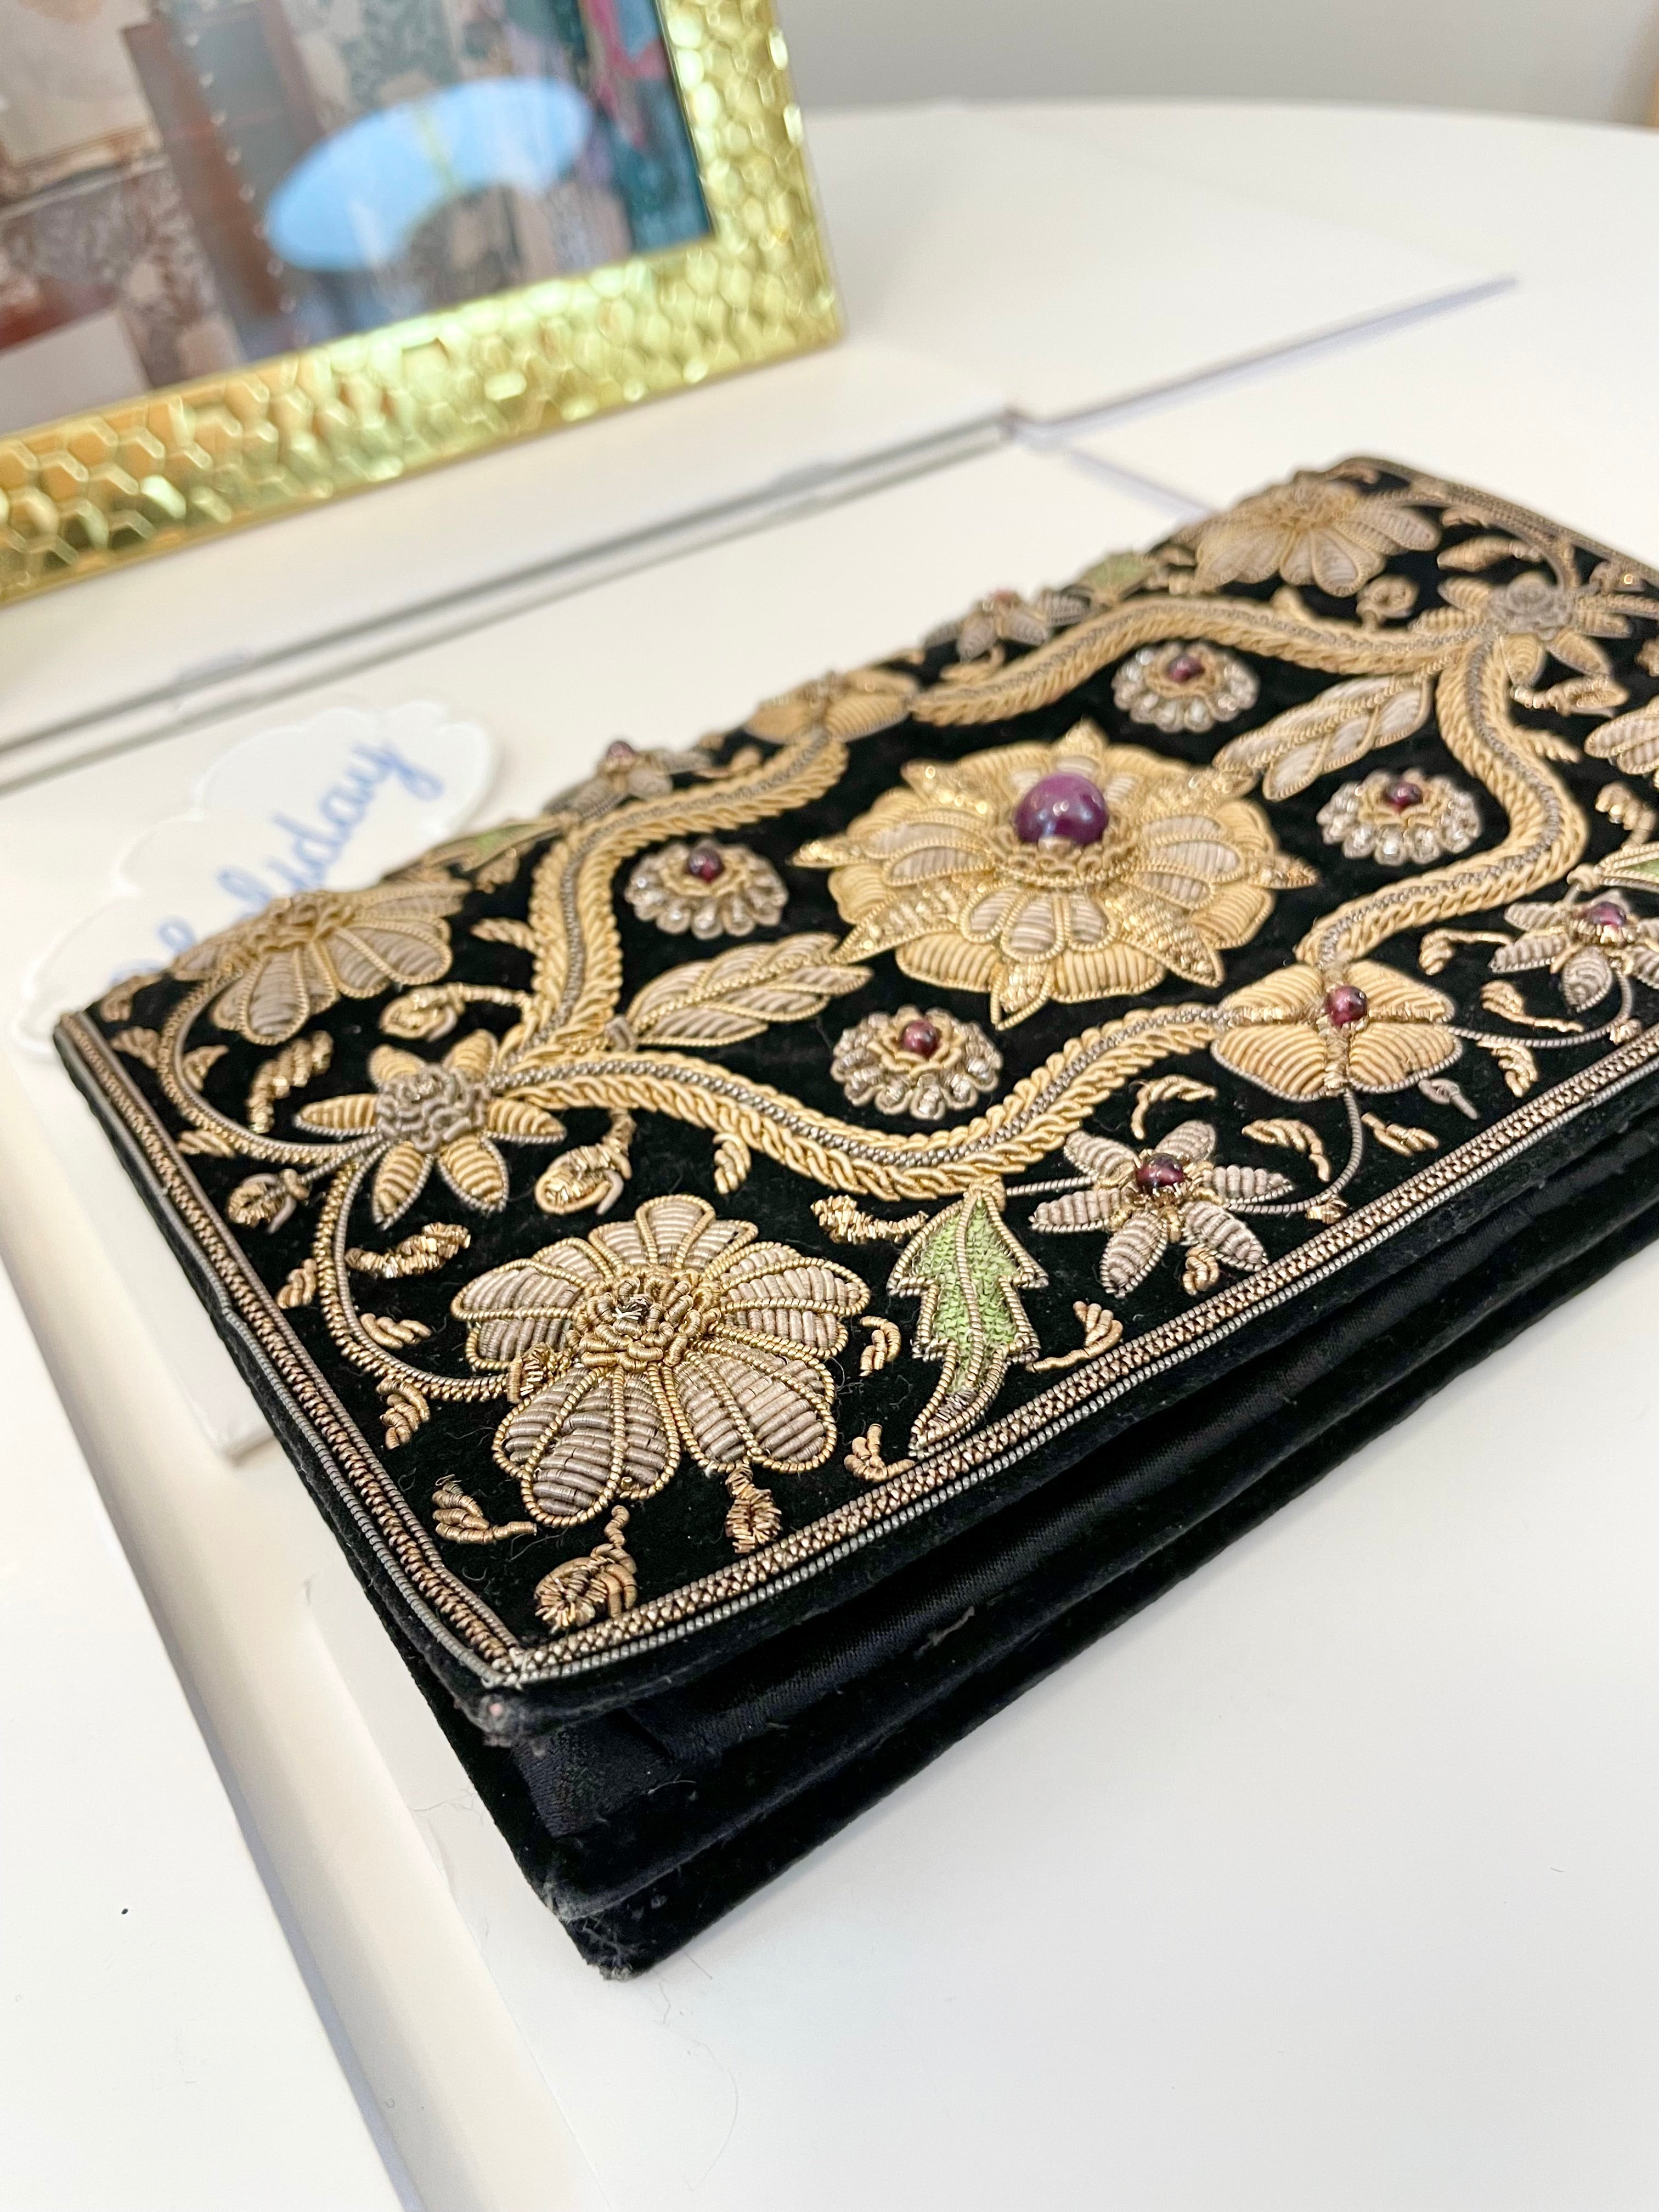 Museum quality divine evening bag, adorned with gems, and gold lame!